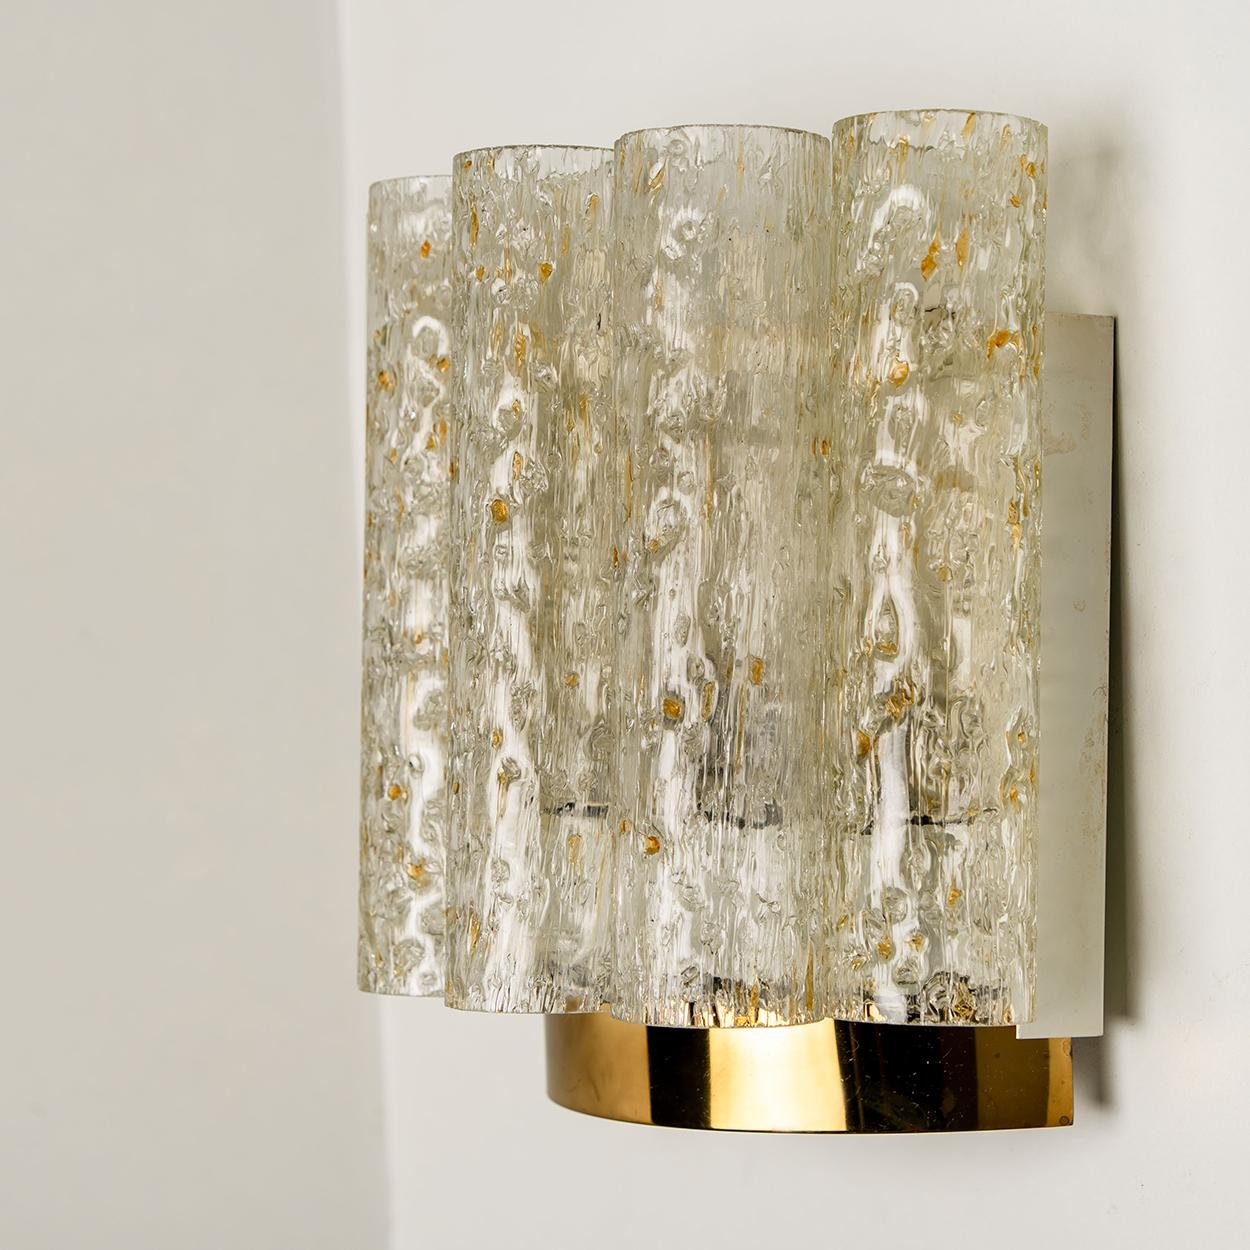 Pair of Doria Wall Lamps in Brass and Glass, 1960s For Sale 2